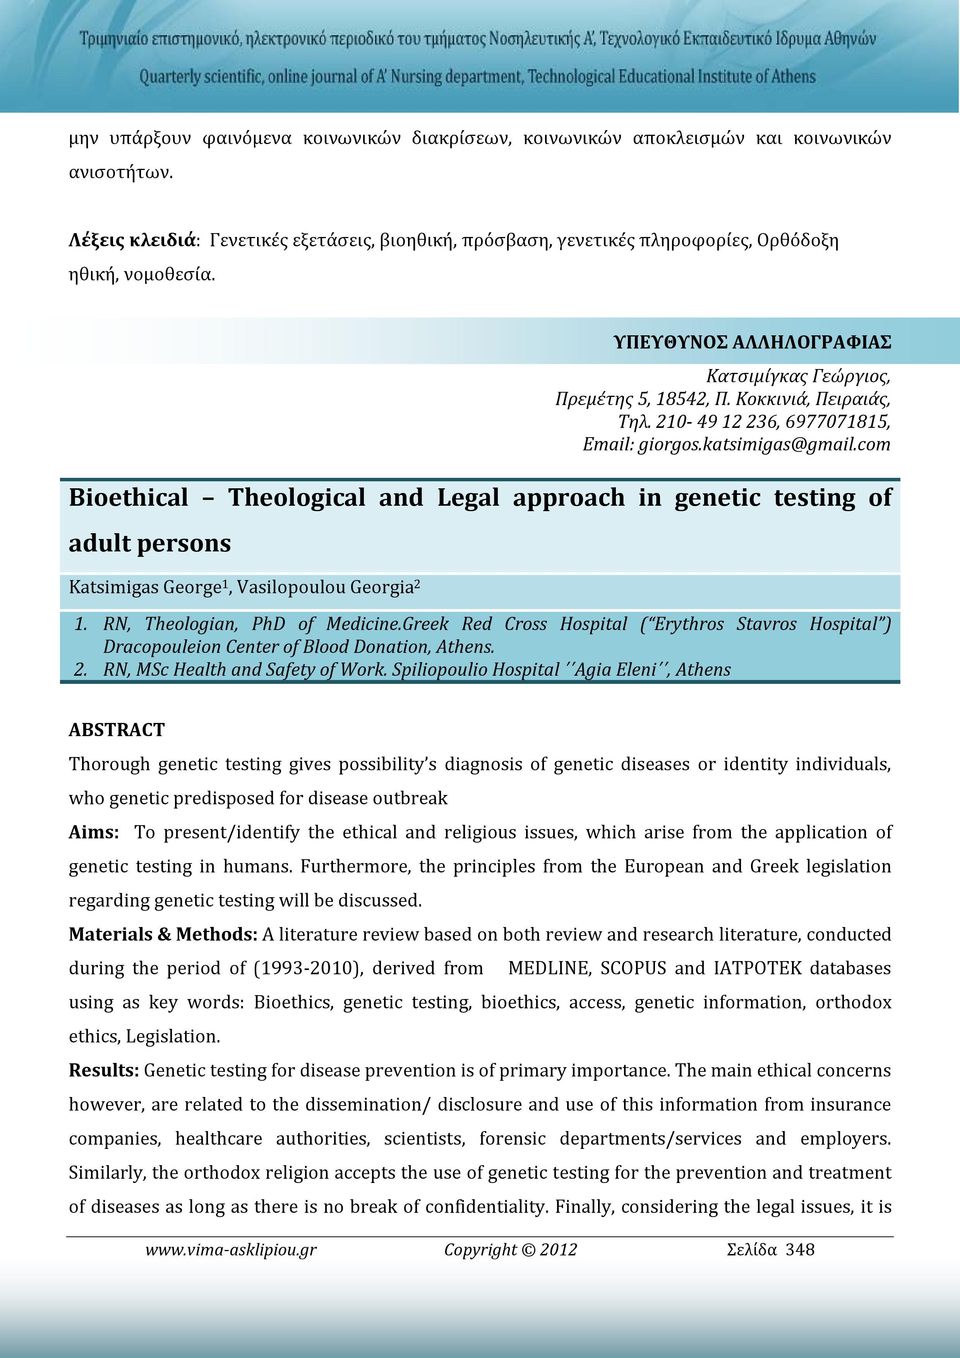 210-49 12 236, 6977071815, Email: giorgos.katsimigas@gmail.com Bioethical Theological and Legal approach in genetic testing of adult persons Katsimigas George 1, Vasilopoulou Georgia 2 1.